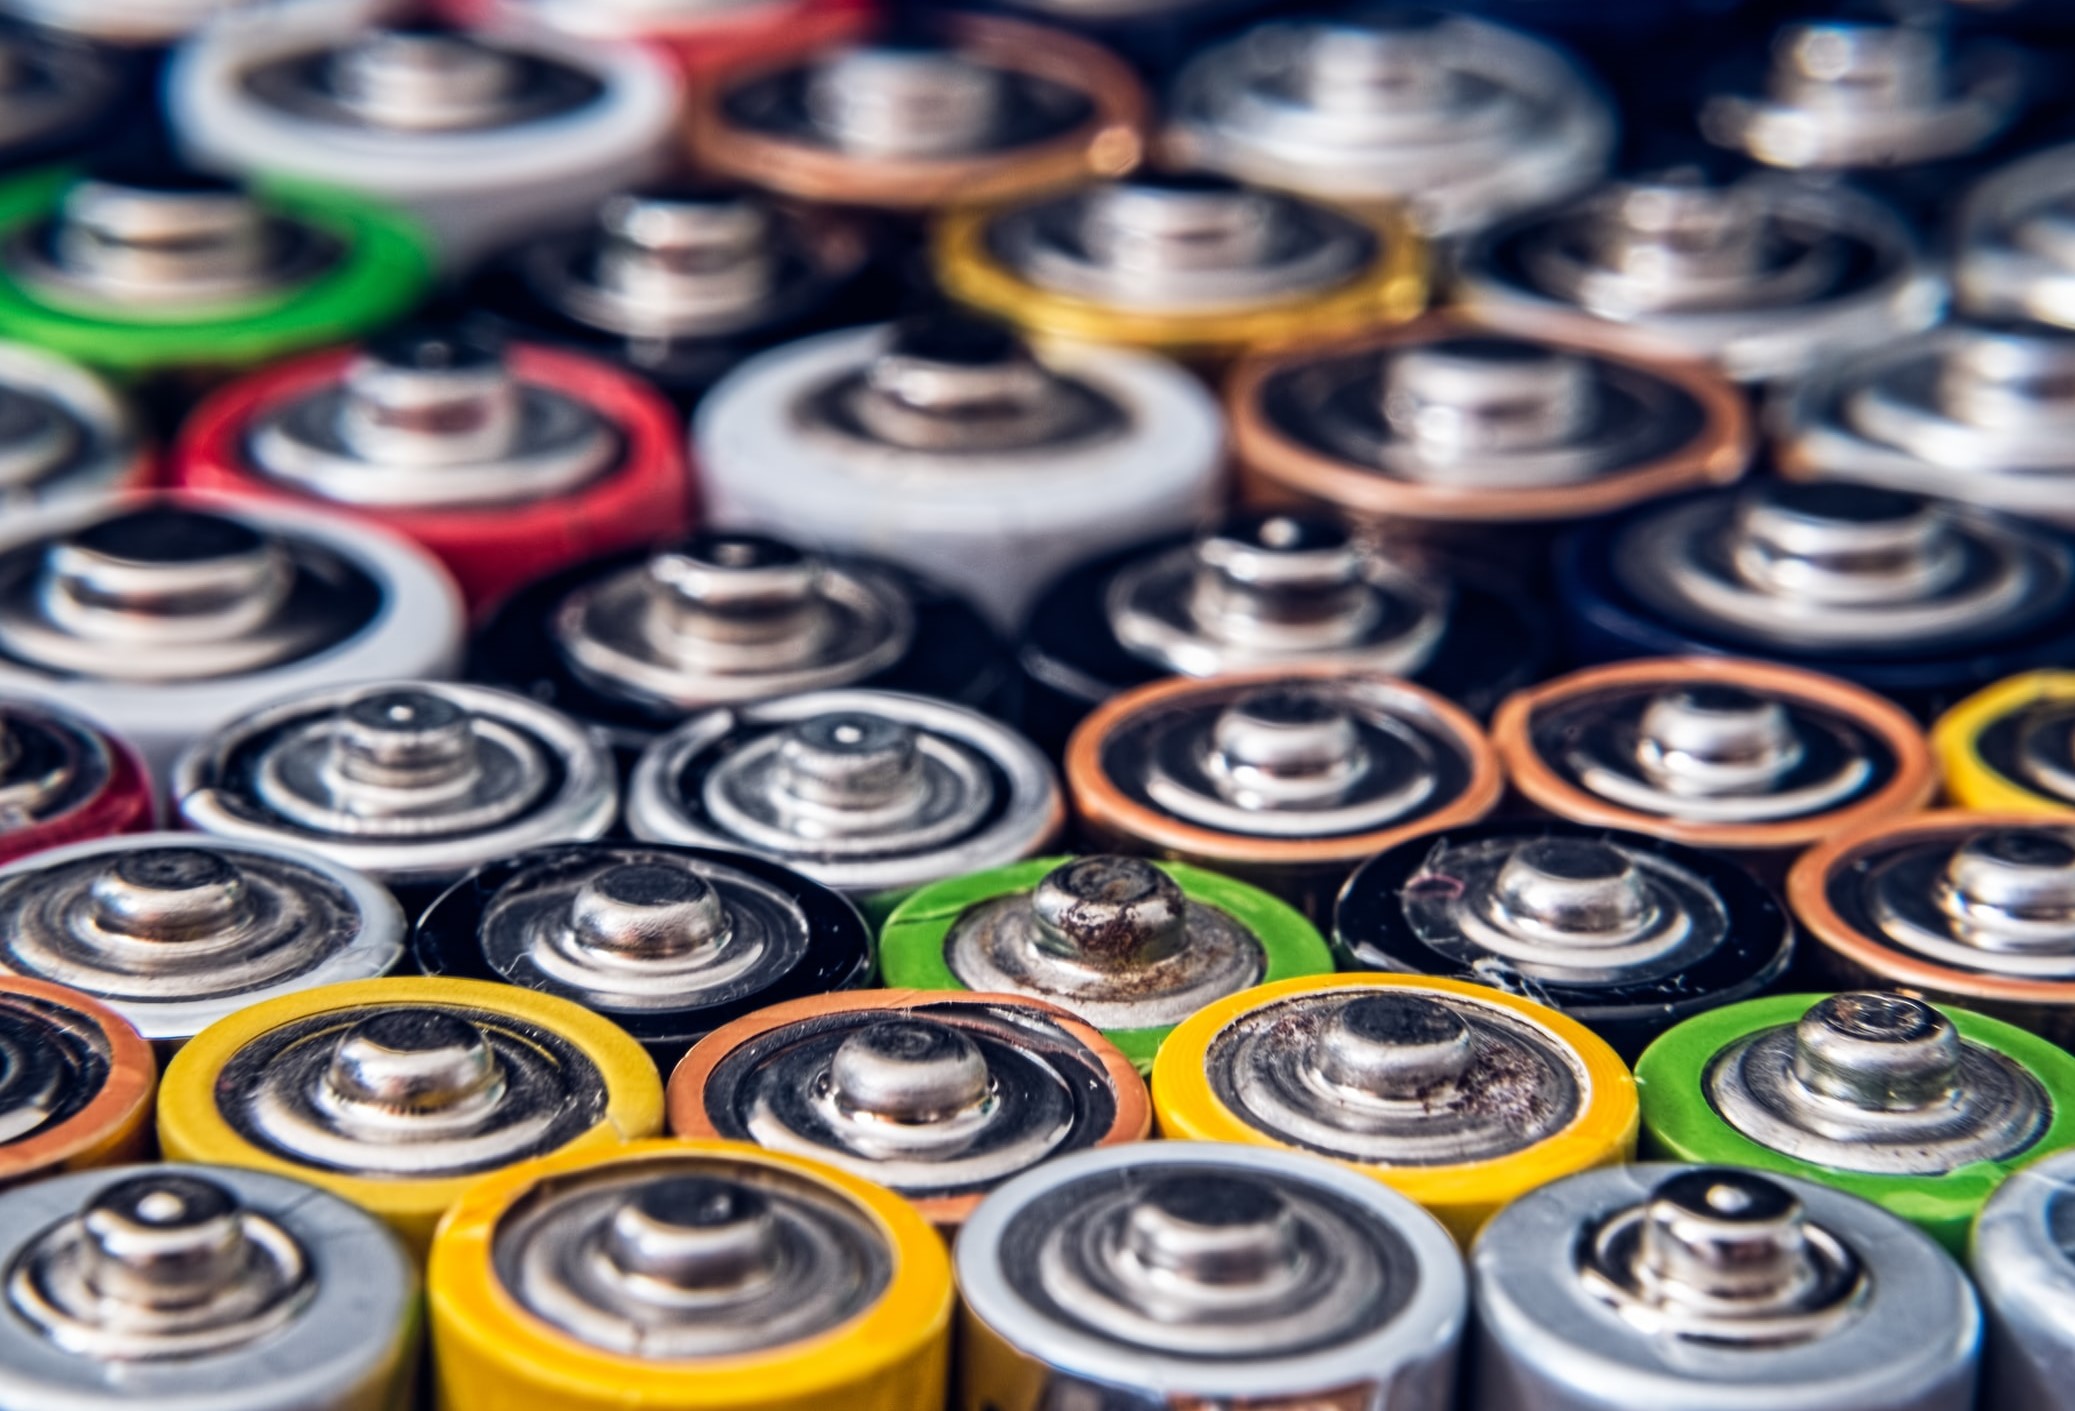 New materials and chemistries for lithium-ion batteries